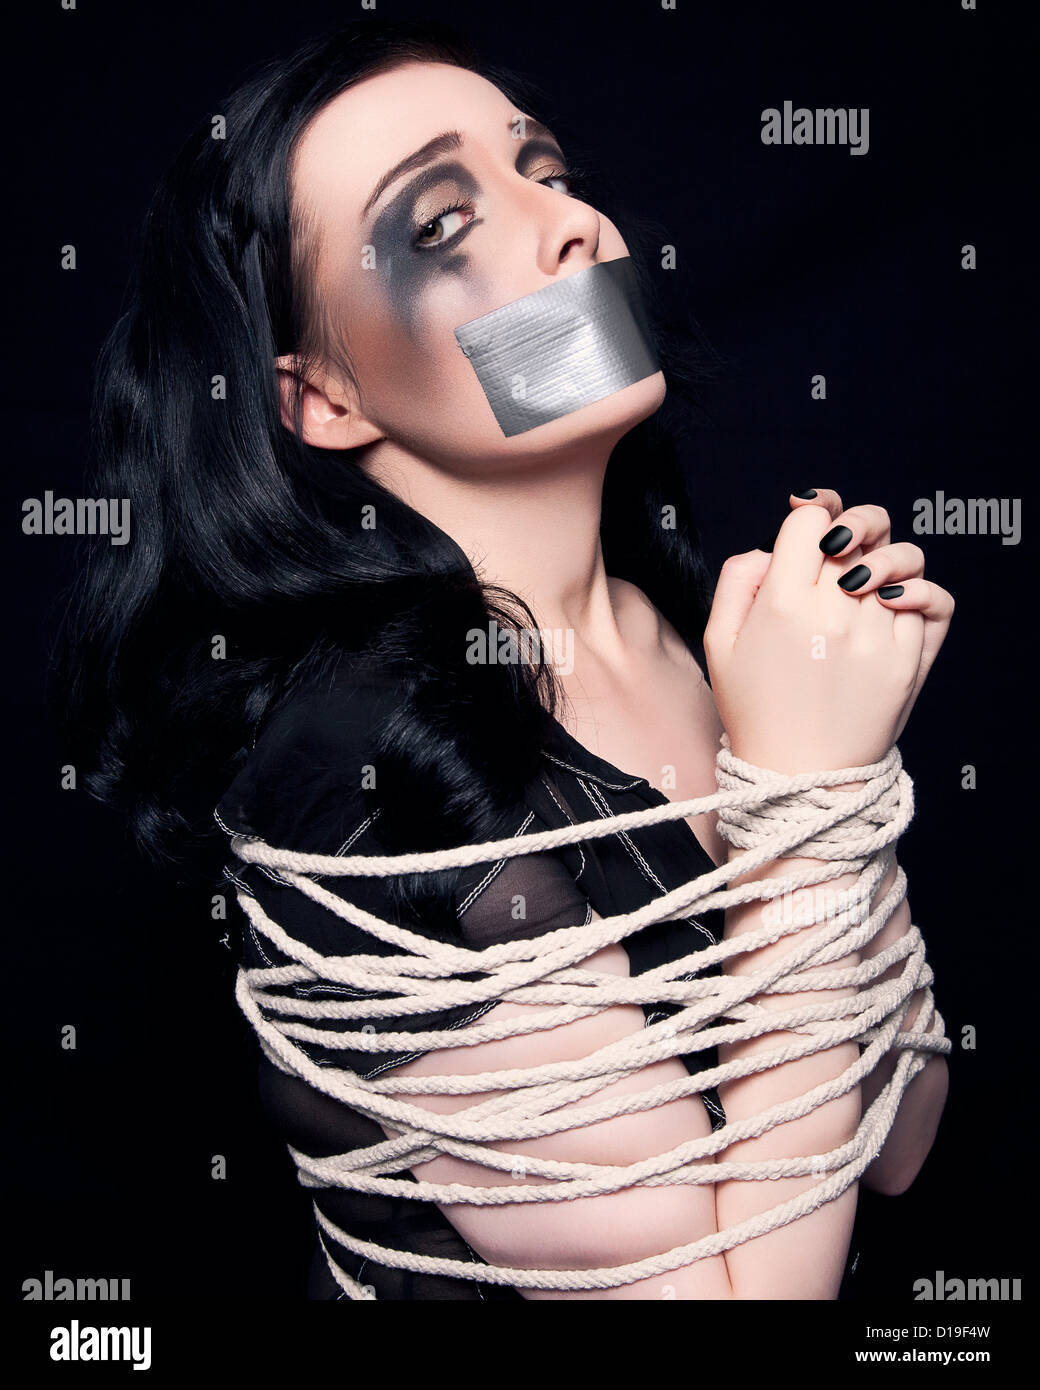 Women Tied-Up And Gagged